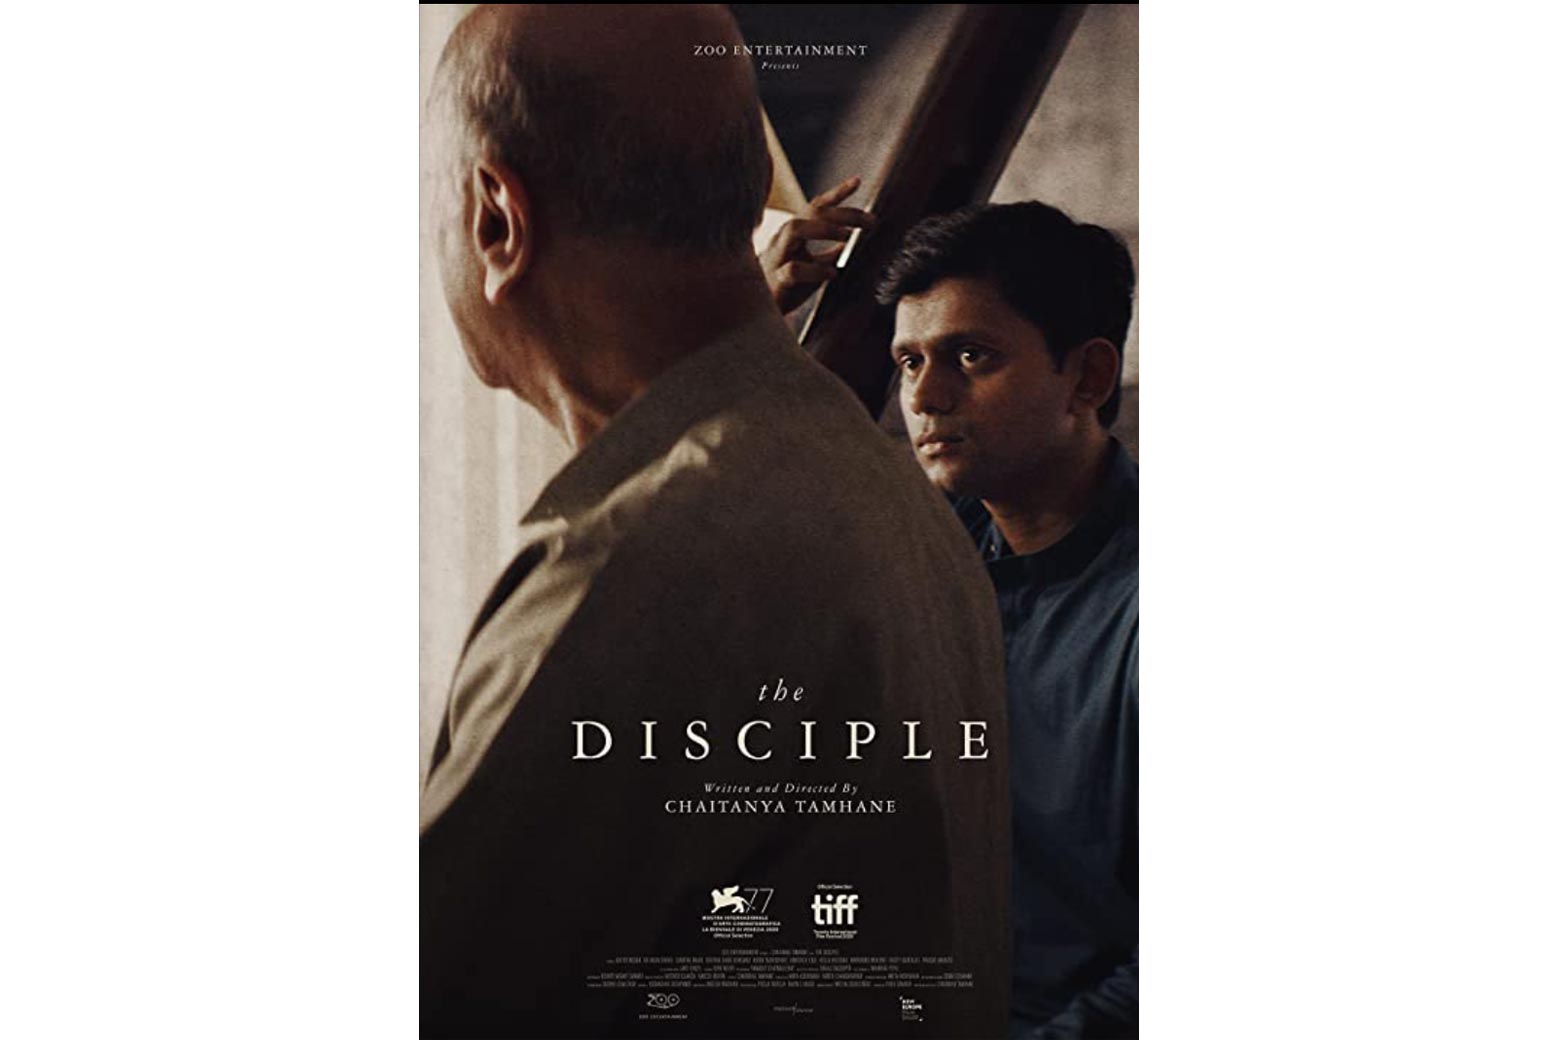 The Disciple poster.